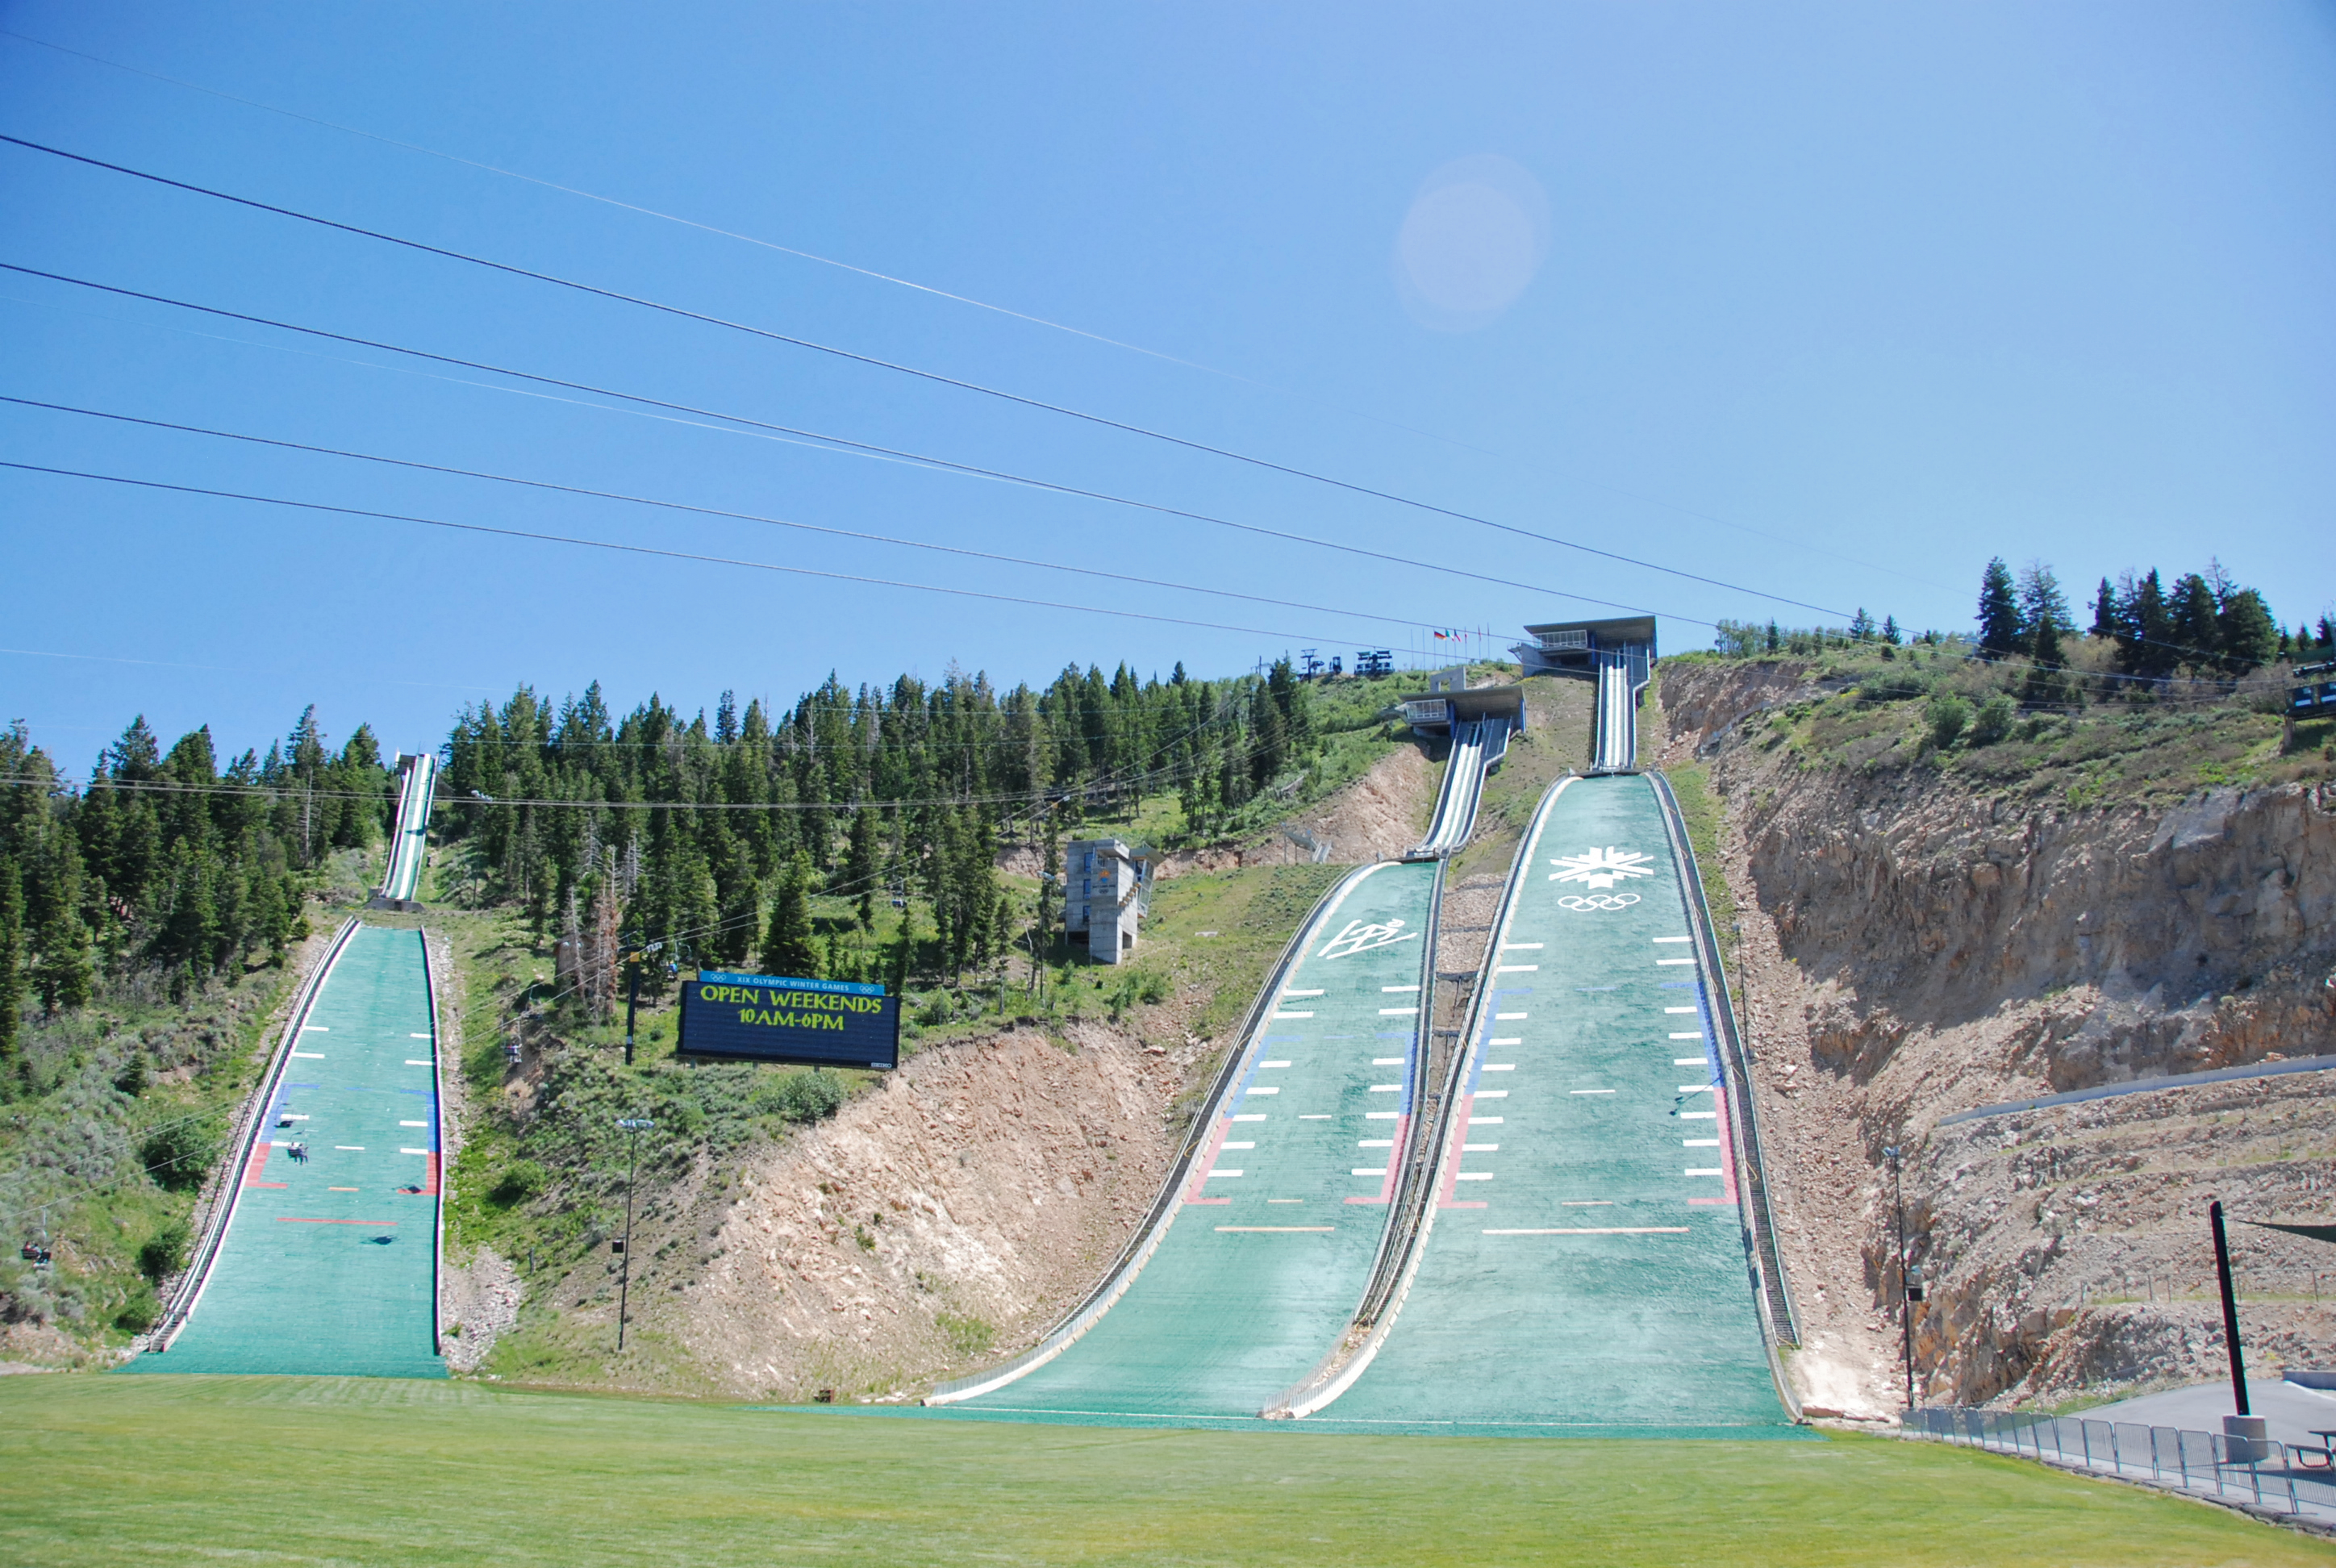 Fileutah Olympic Park Skijump Park City Wikimedia Commons with regard to The Elegant  ski jumping utah intended for Existing Home